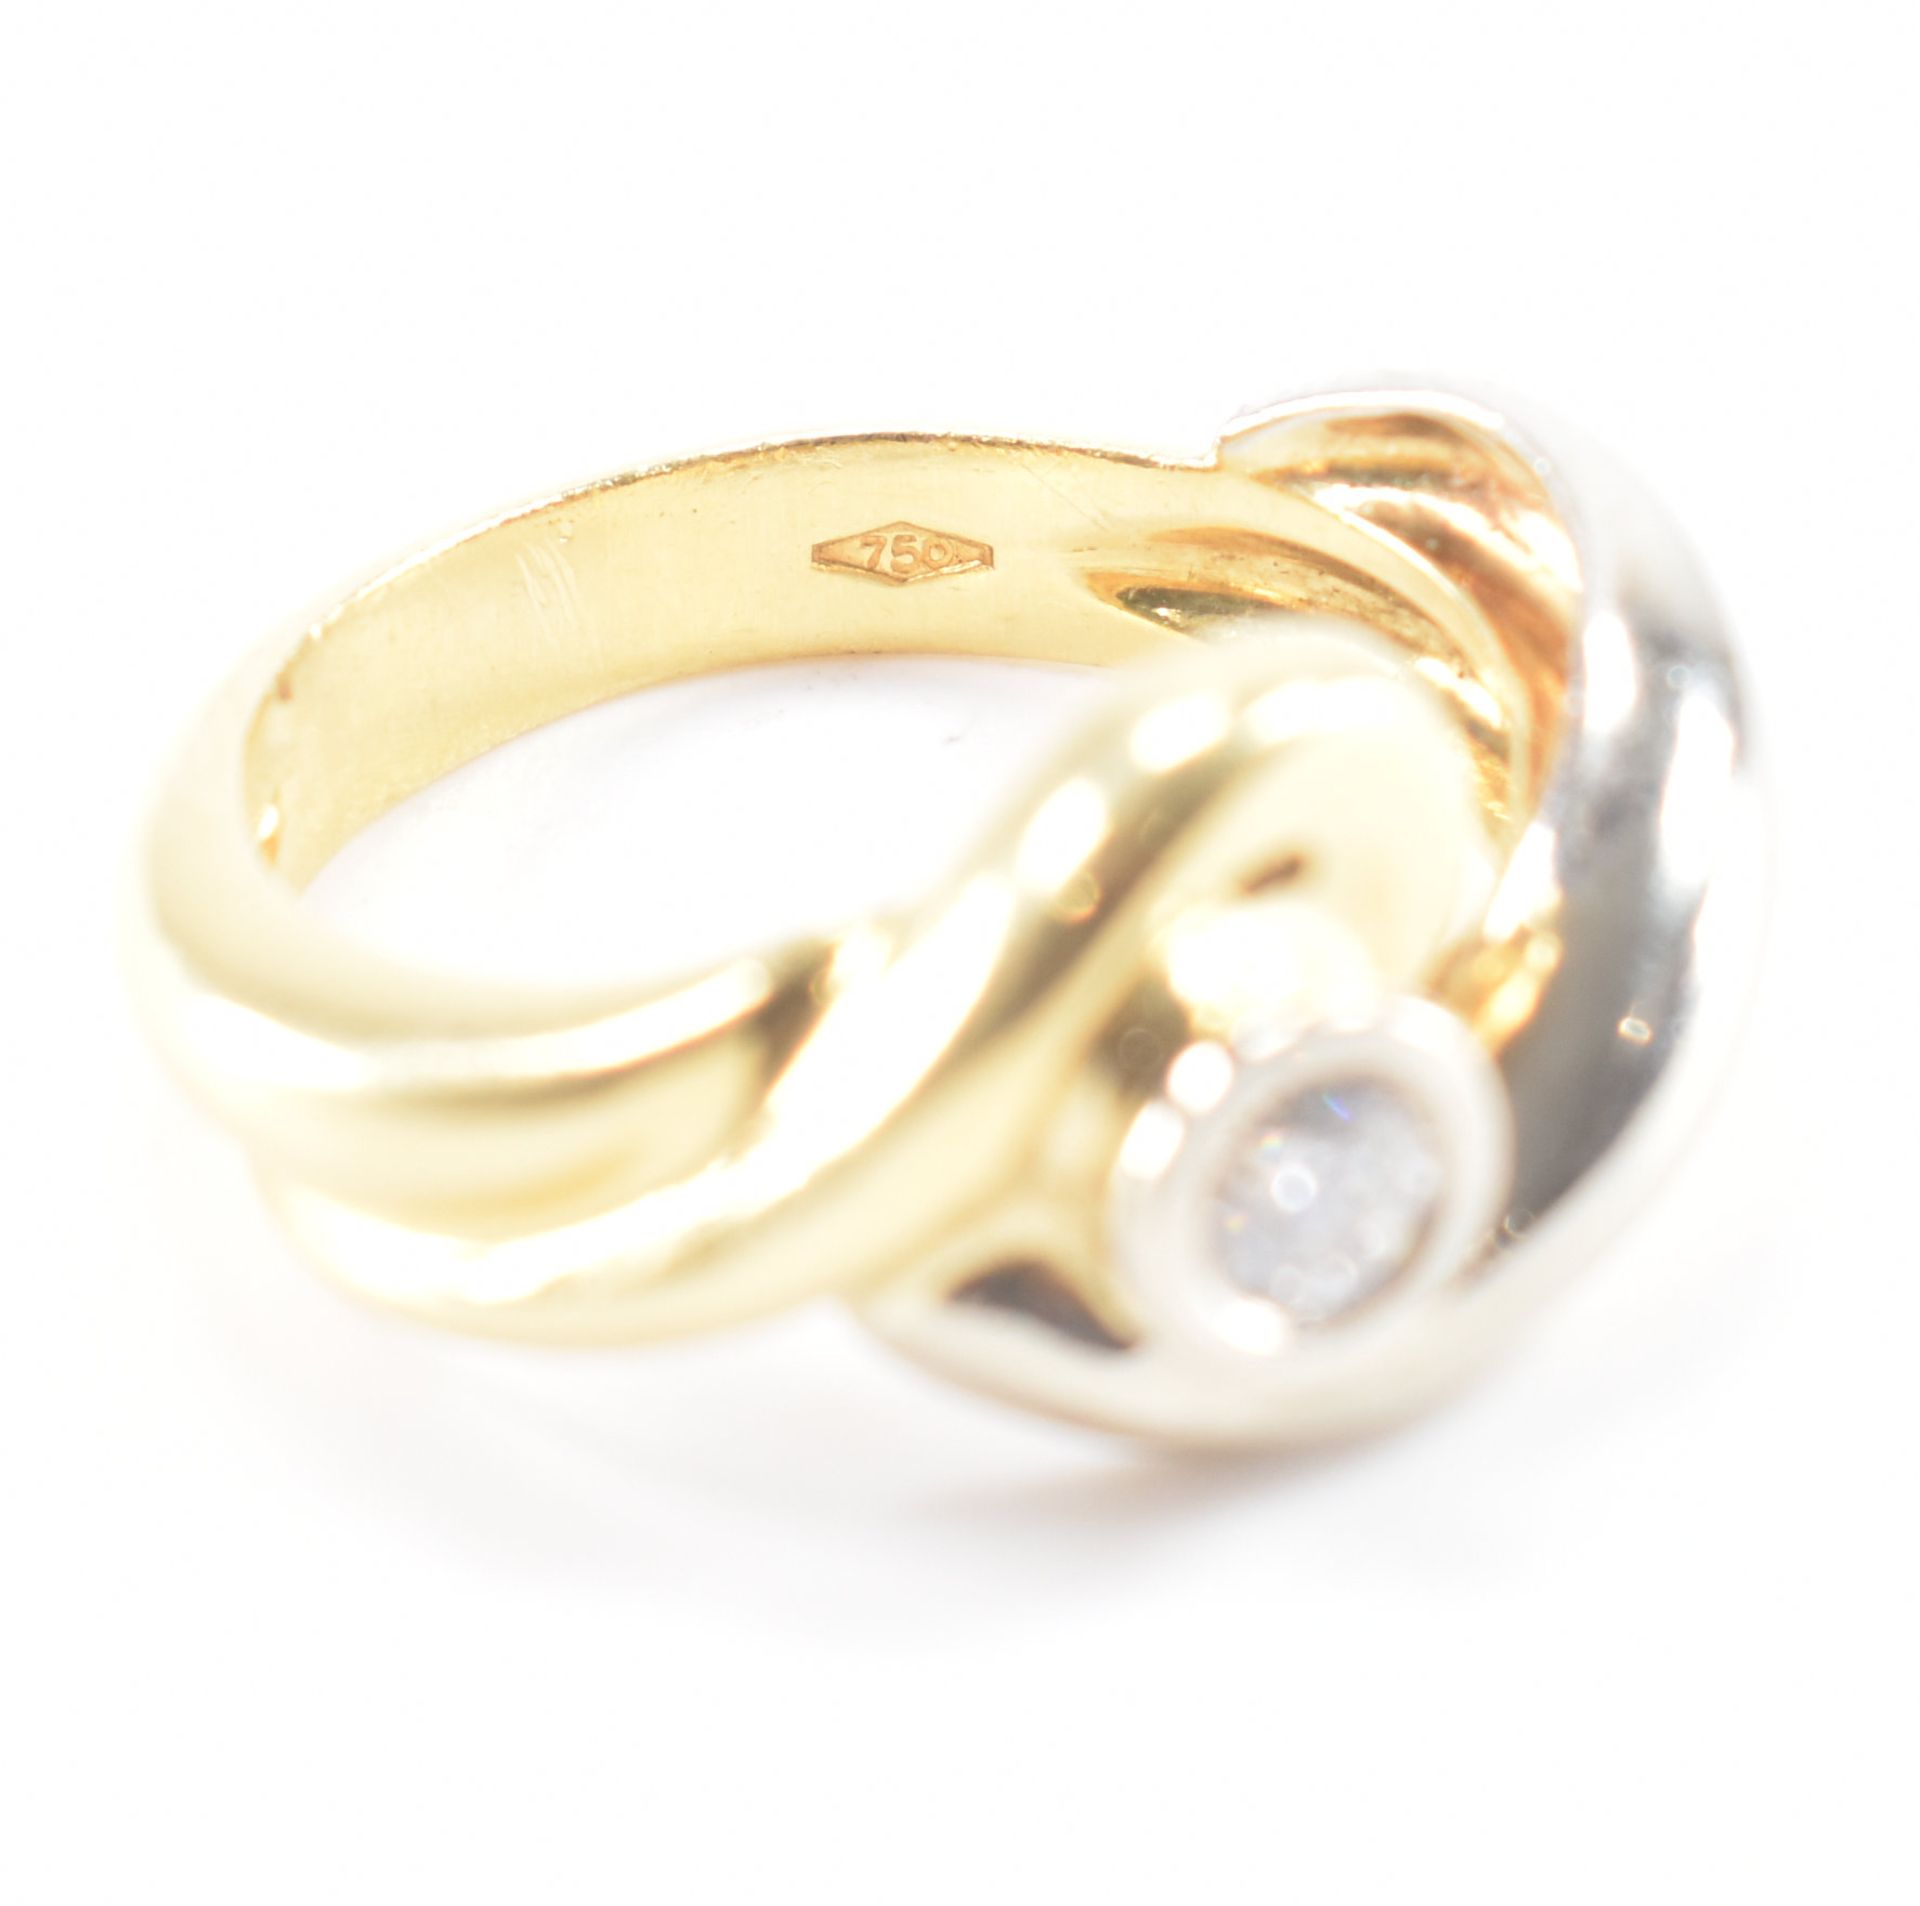 18CT BICOLOUR GOLD & DIAMOND SOLITAIRE RING - Image 7 of 9